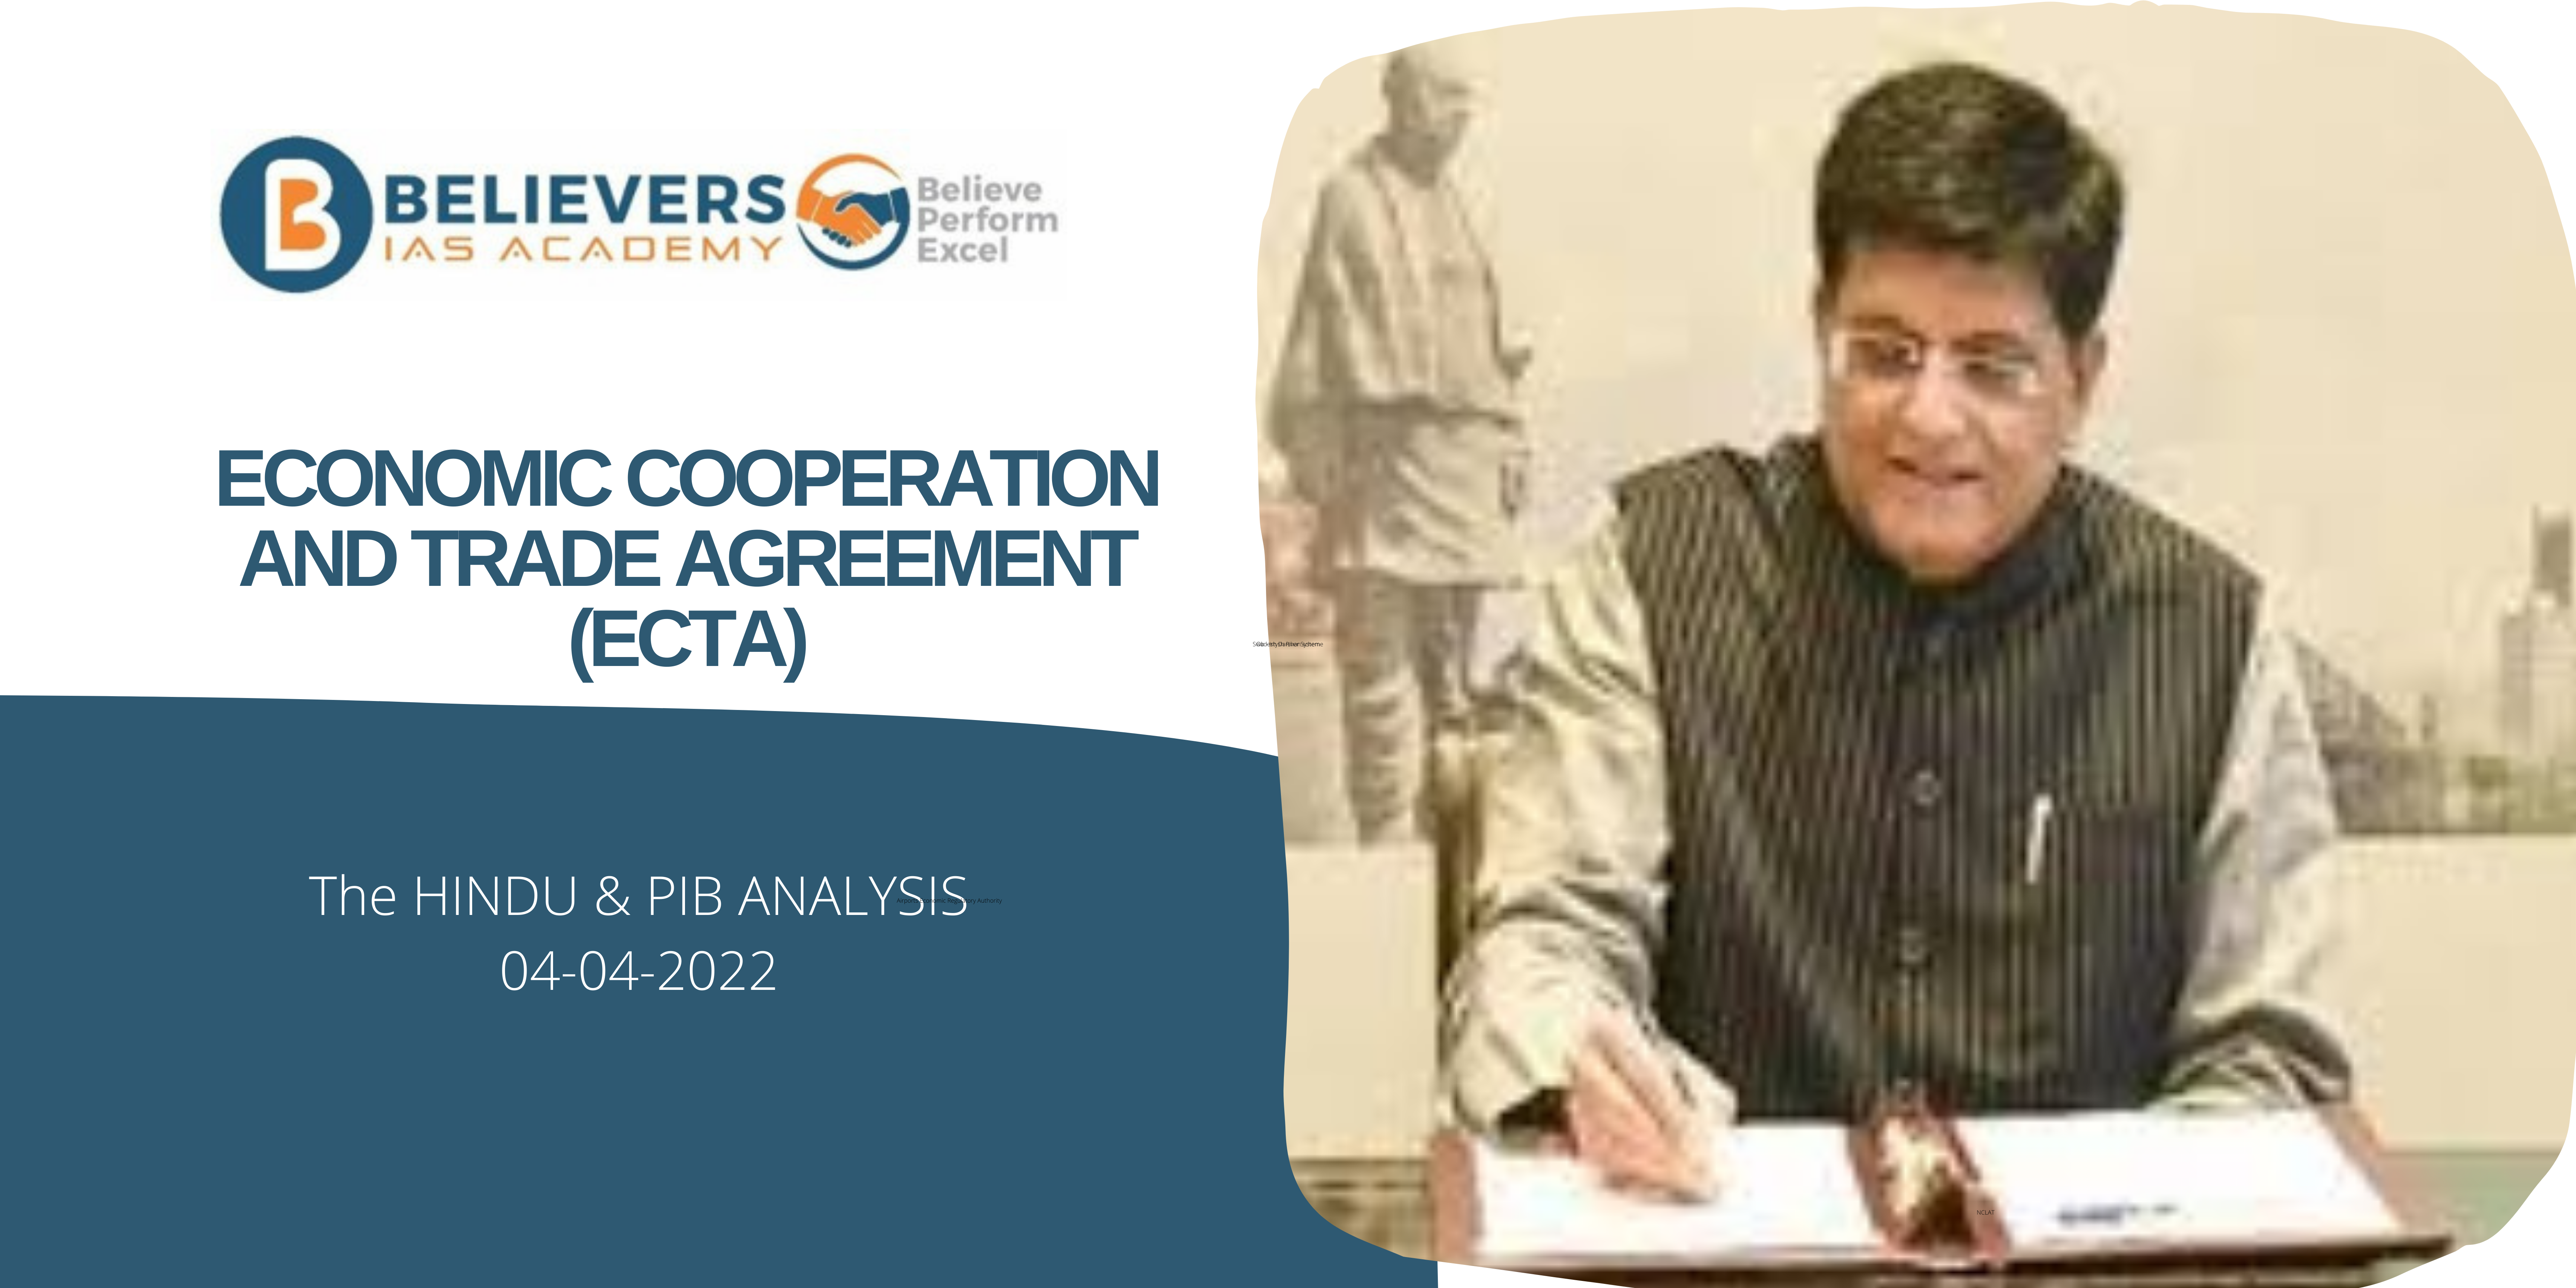 IAS Current affairs - Economic Cooperation and Trade Agreement (ECTA)